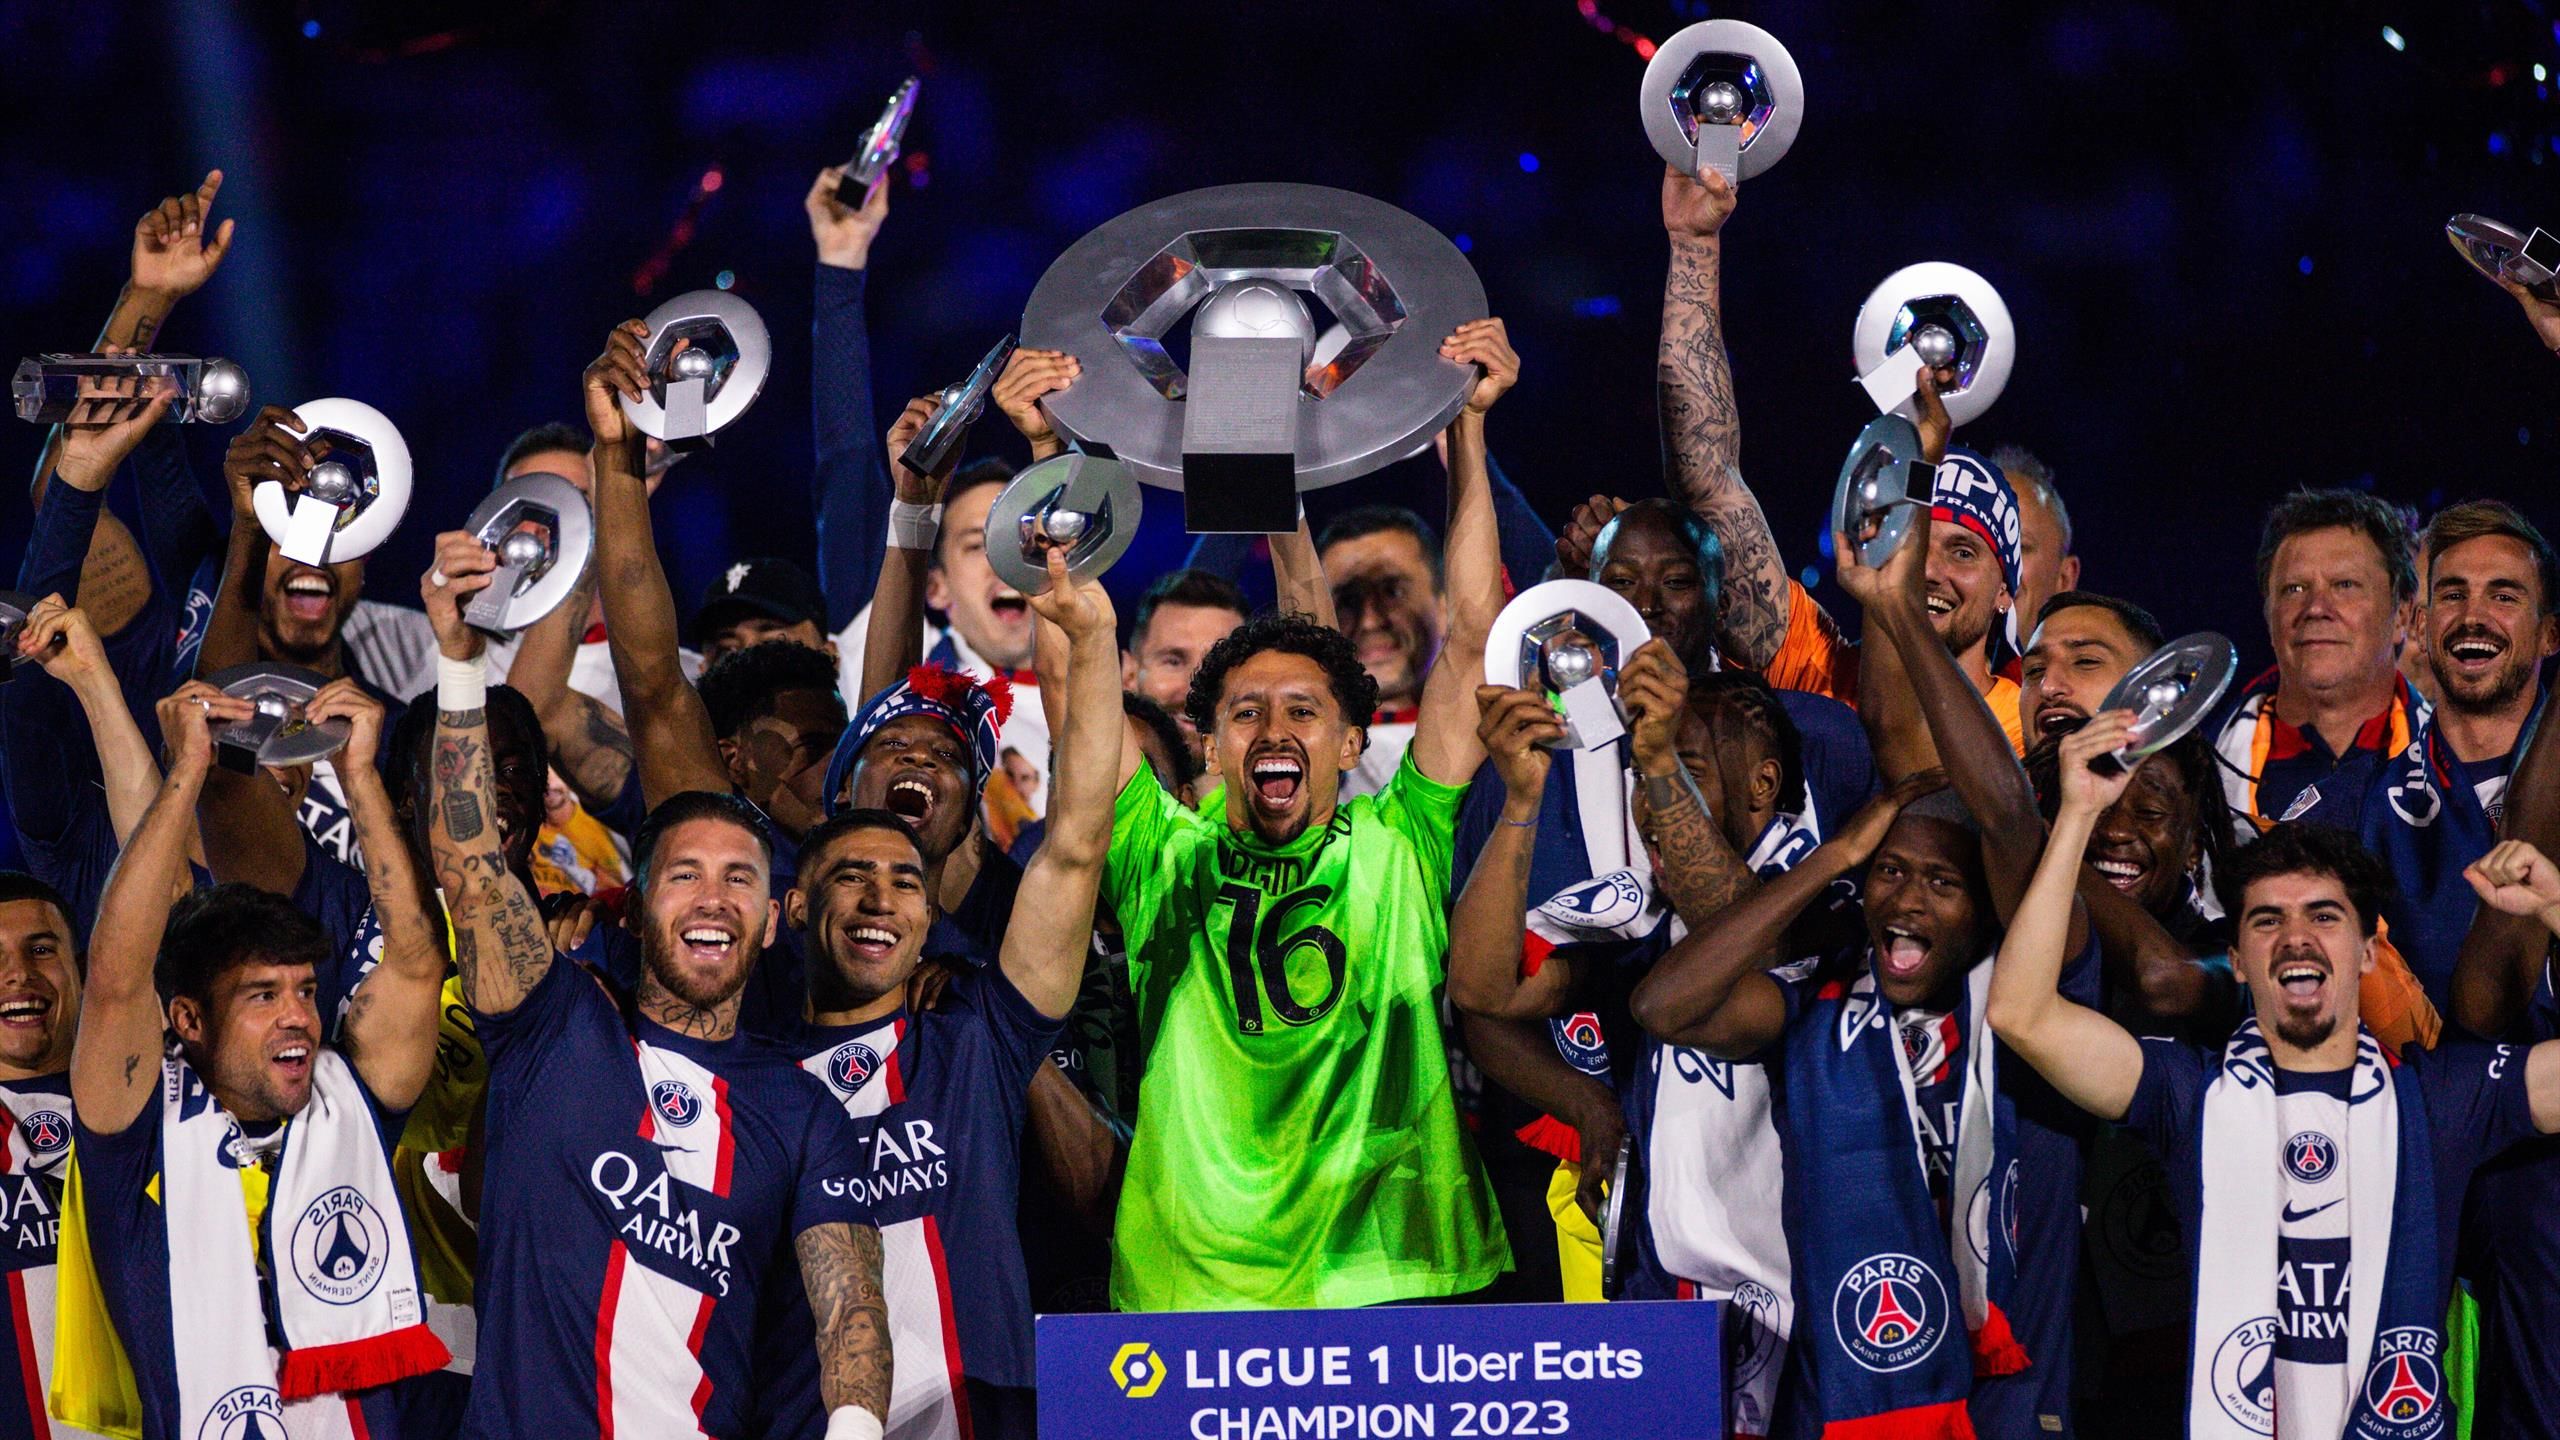 Battle of the Leagues Welcome to the tournament! Will Ligue 1 win